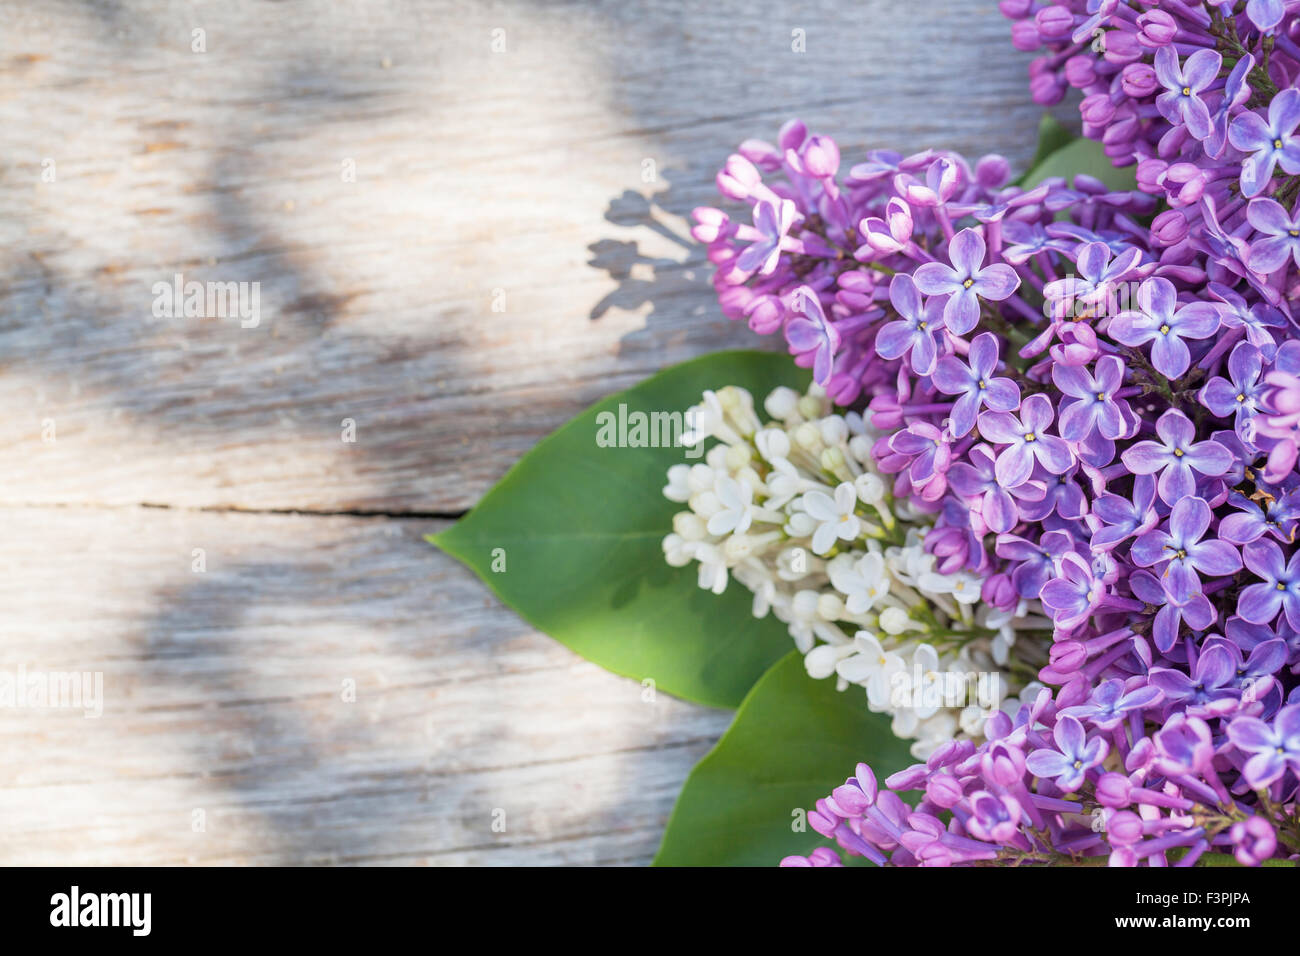 Colorful lilac flowers on garden table. Top view with copy space Stock Photo